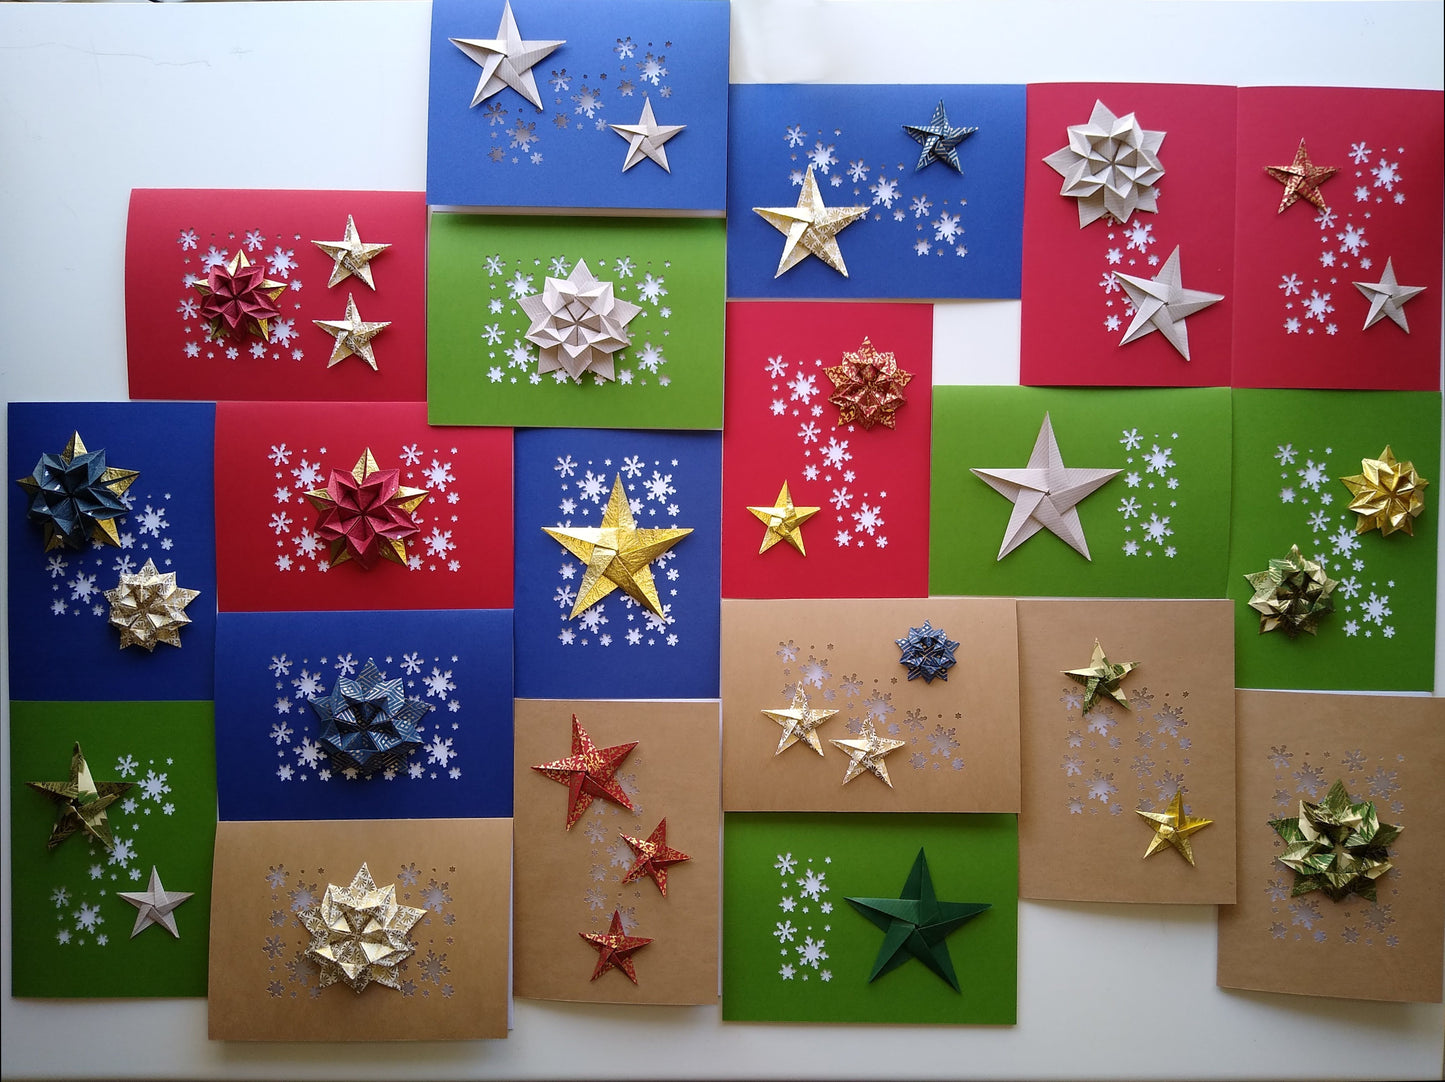 Premium Star and Snow Holiday Cards (Set of 5)